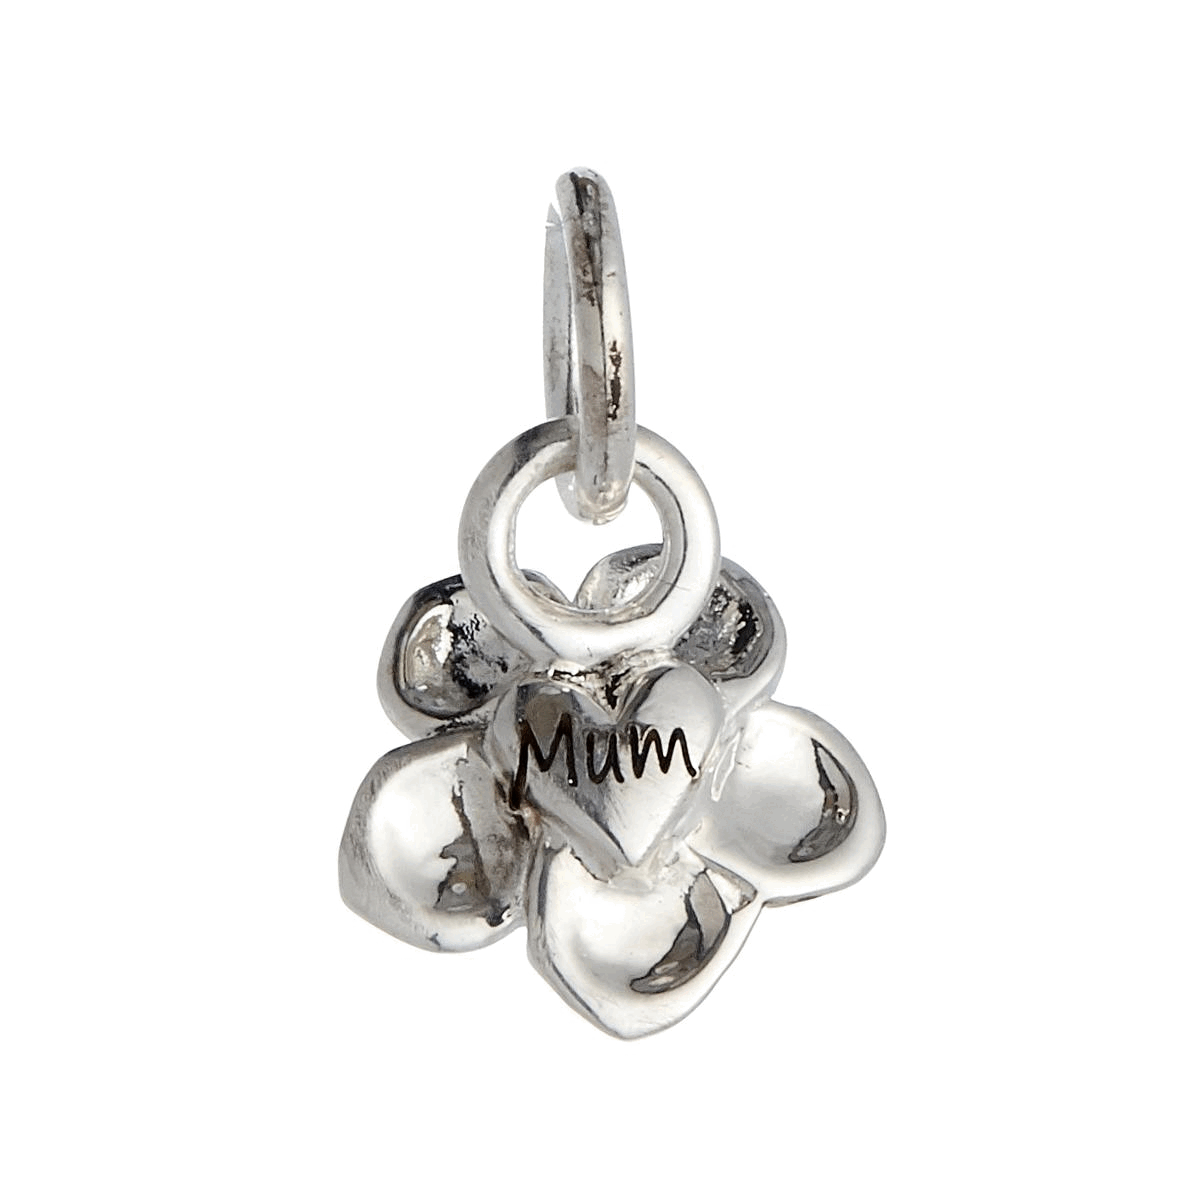 Silver forget-me-not flower necklace with heart on the back memorial gift slow fashion Chelsea Flower Show